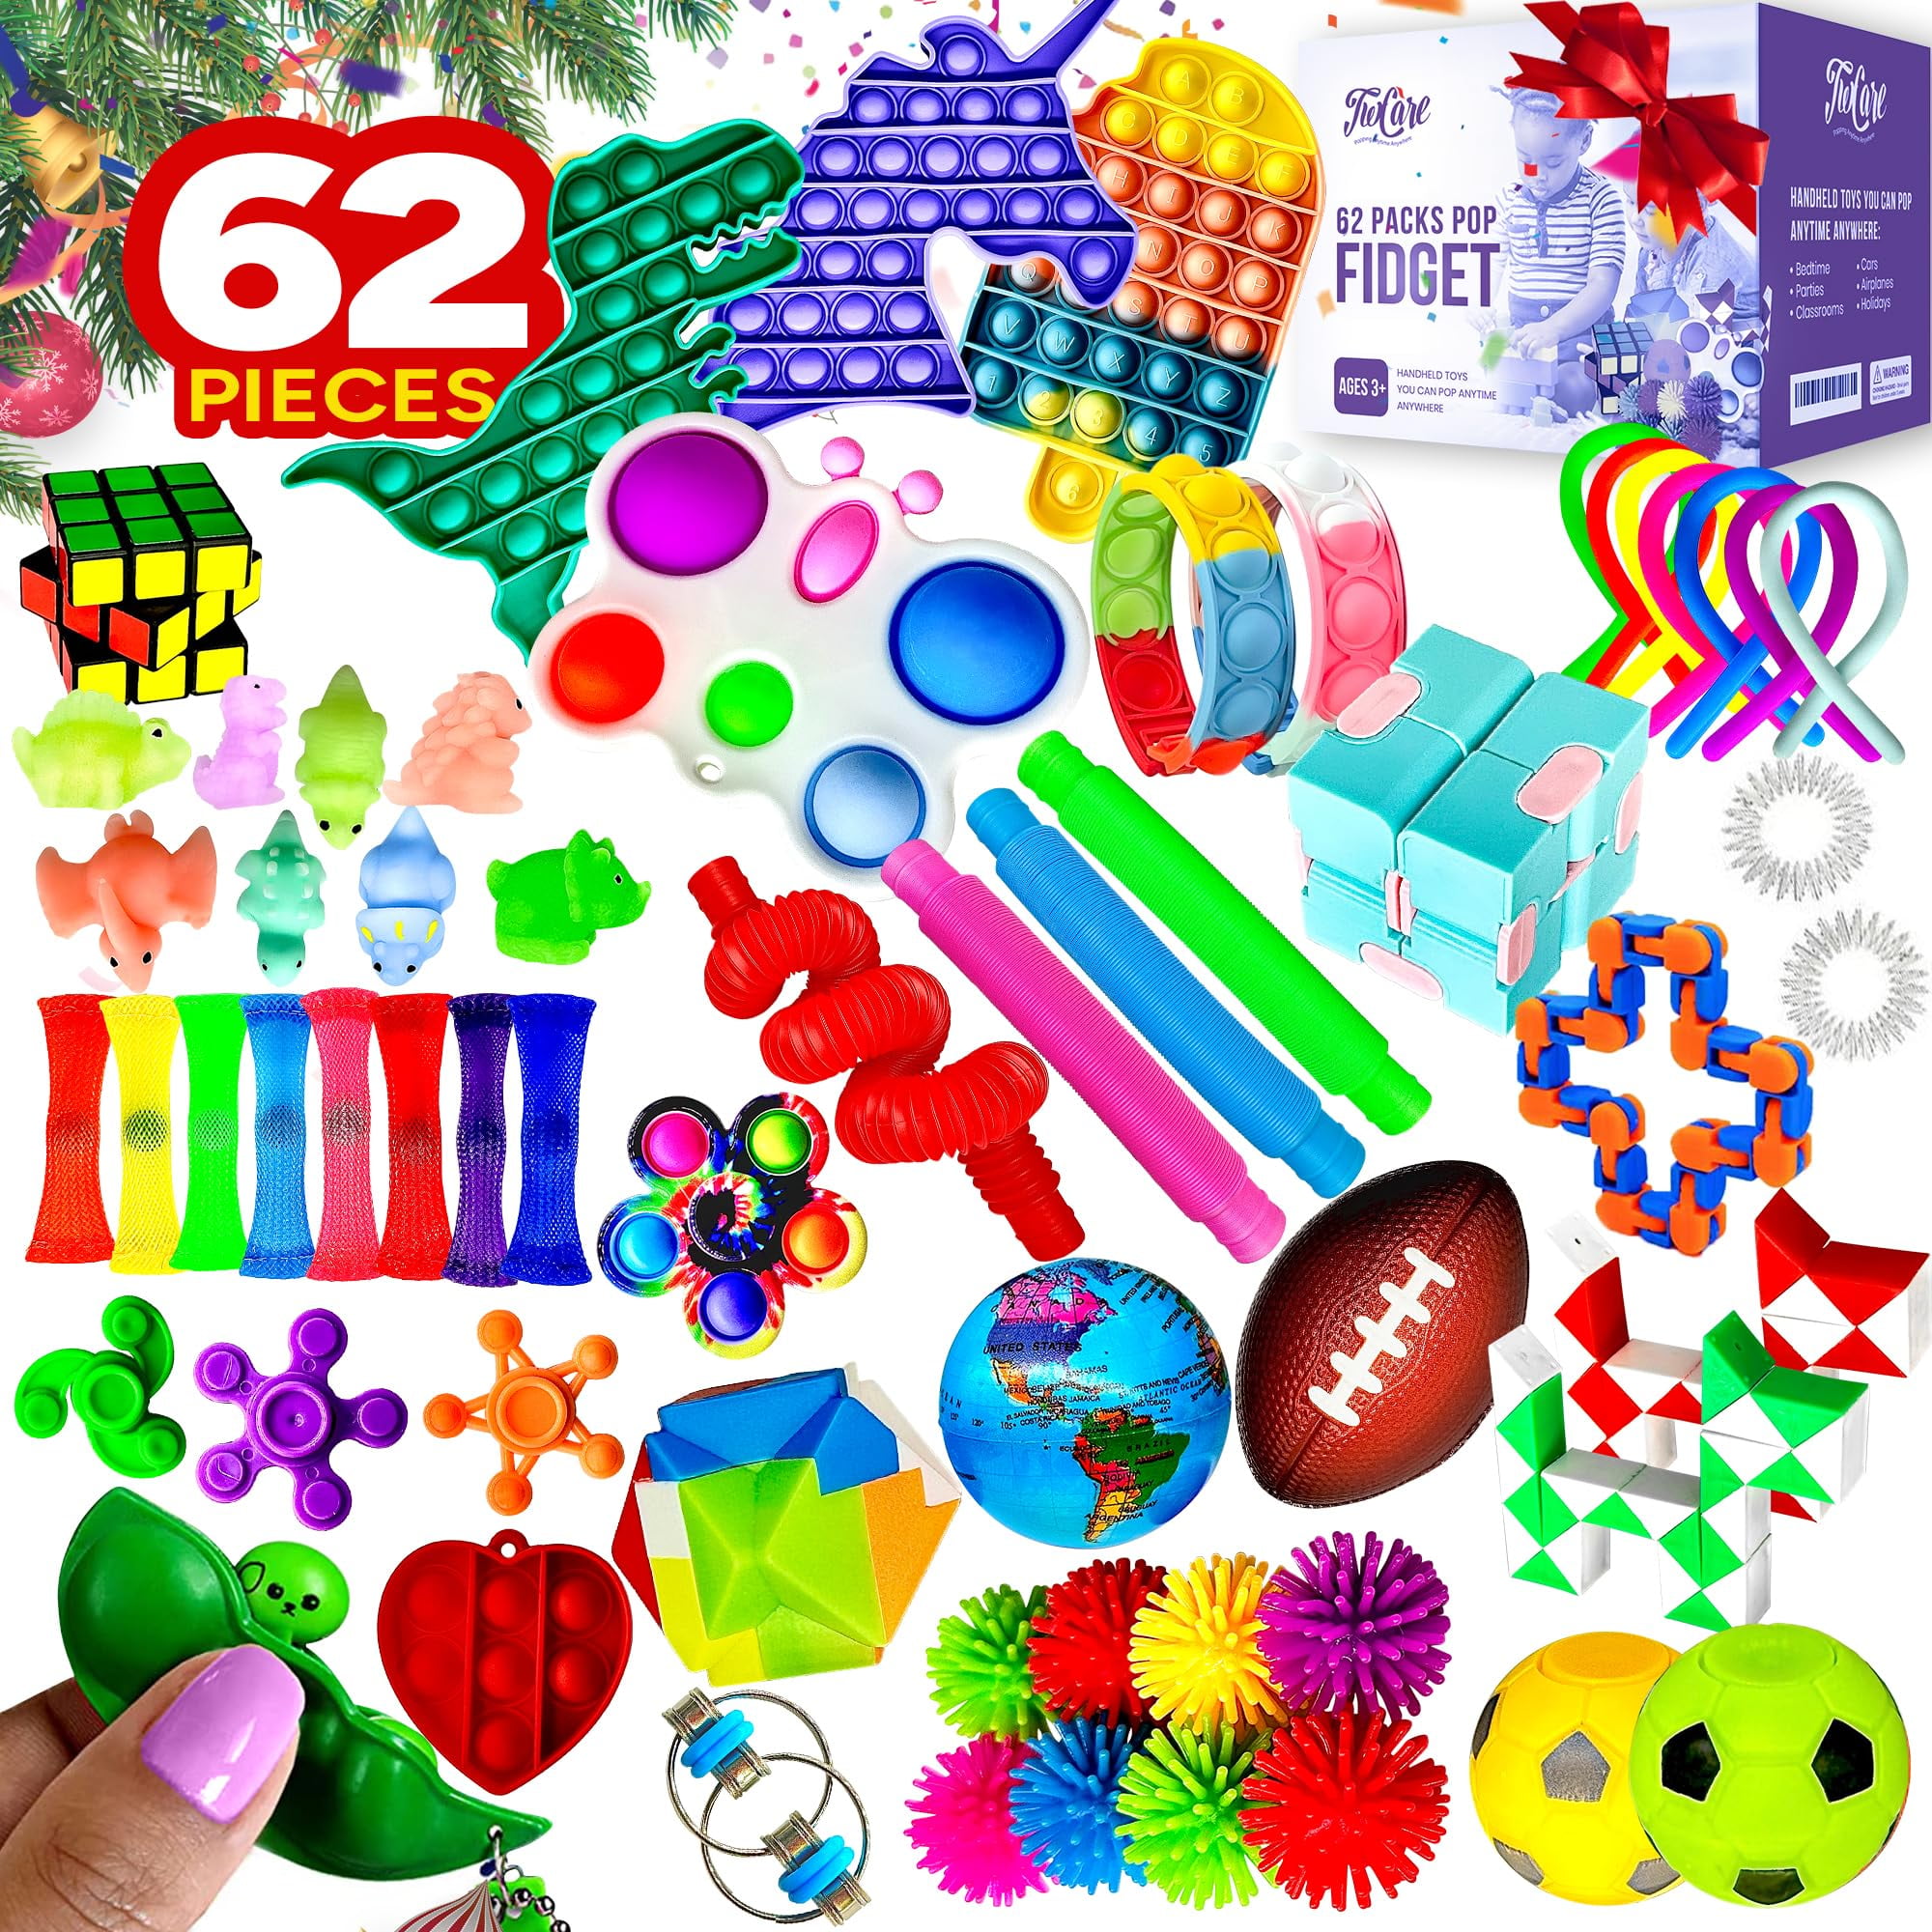 Dropship Pop Fidget Toys Multi-Item Fidget Toy Pack Sensory Fidget Pack Anti-Anxiety  Stress Relief Fidget Toys Set Party Favors Birthday Gifts For Adults Kids  (24Pcs-A) to Sell Online at a Lower Price